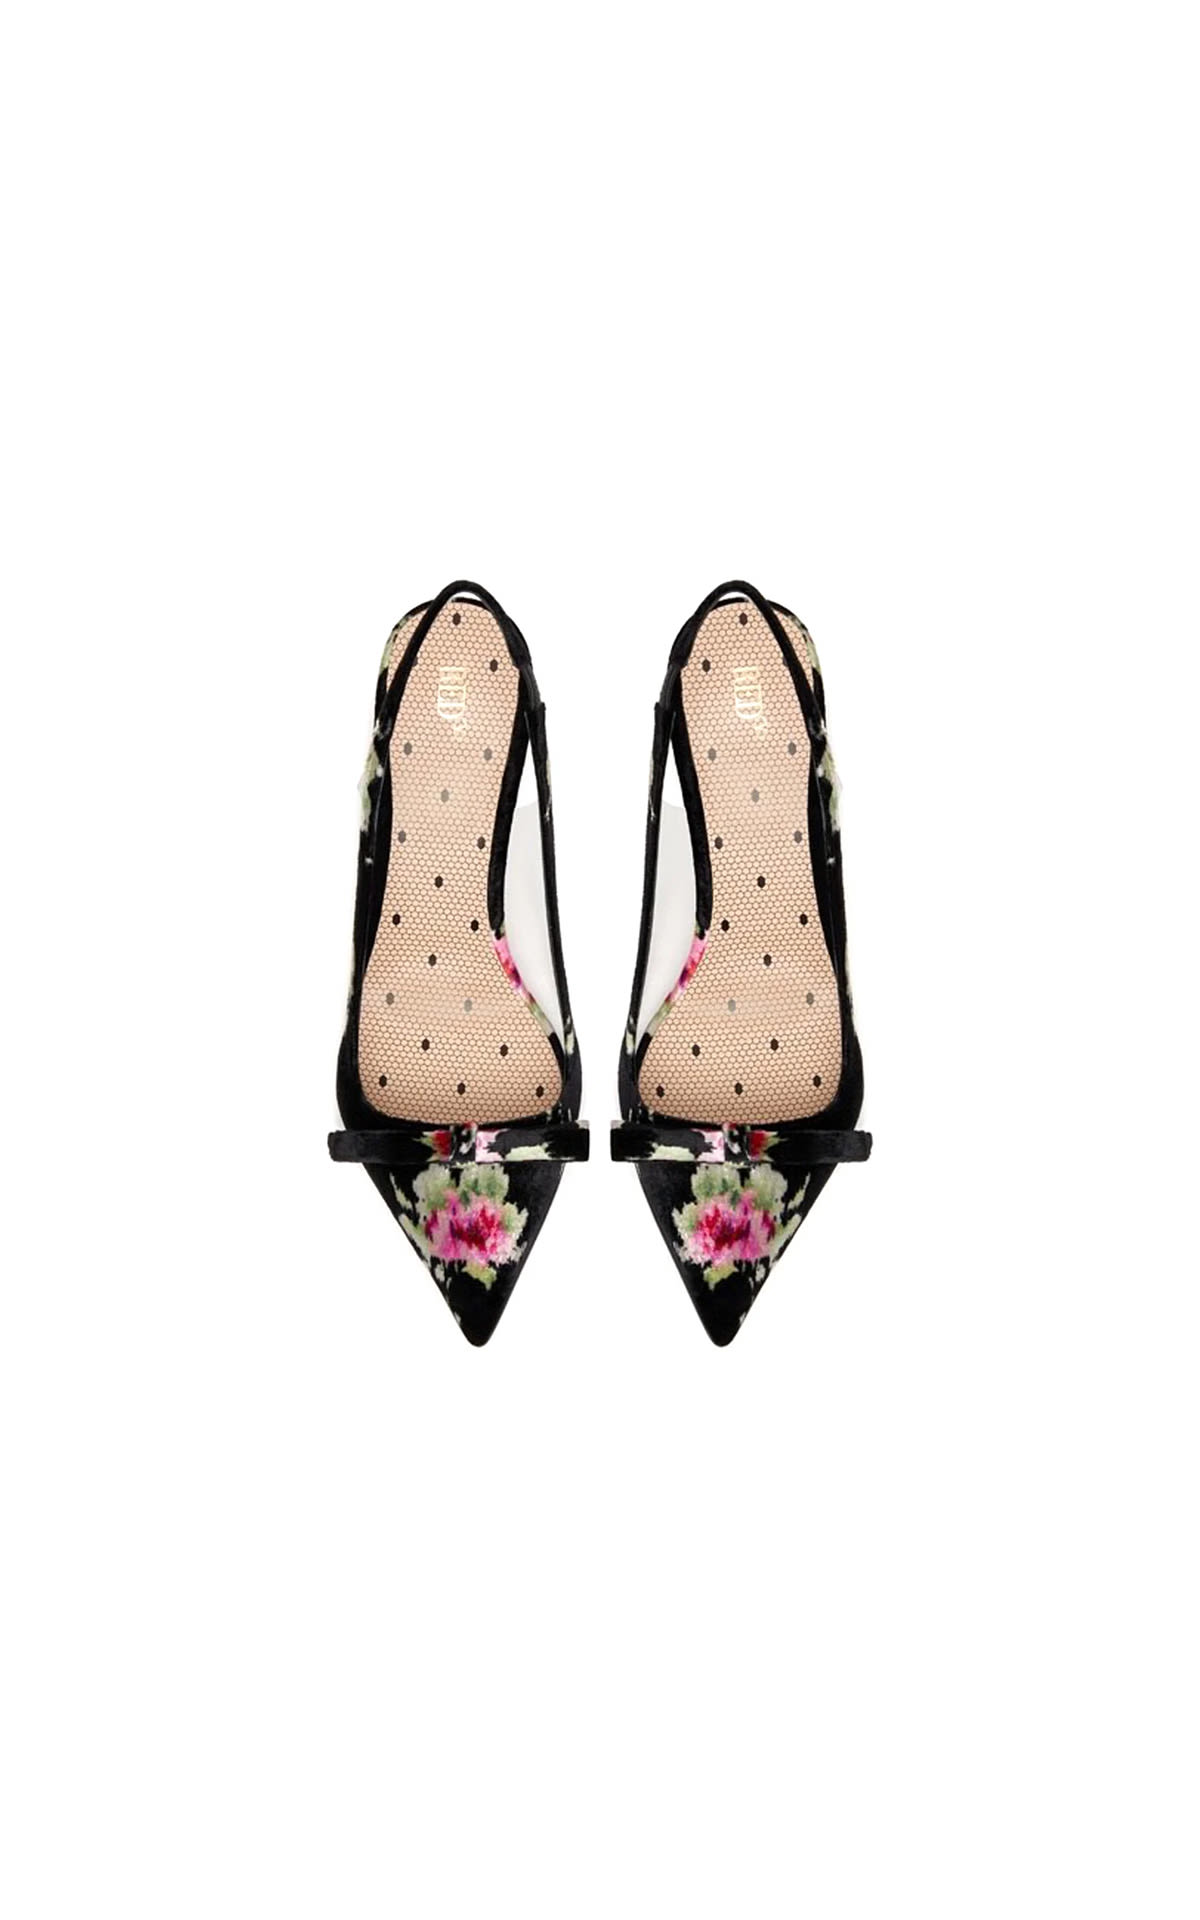 Floral sandals with transparent pvc inserts RedValentino